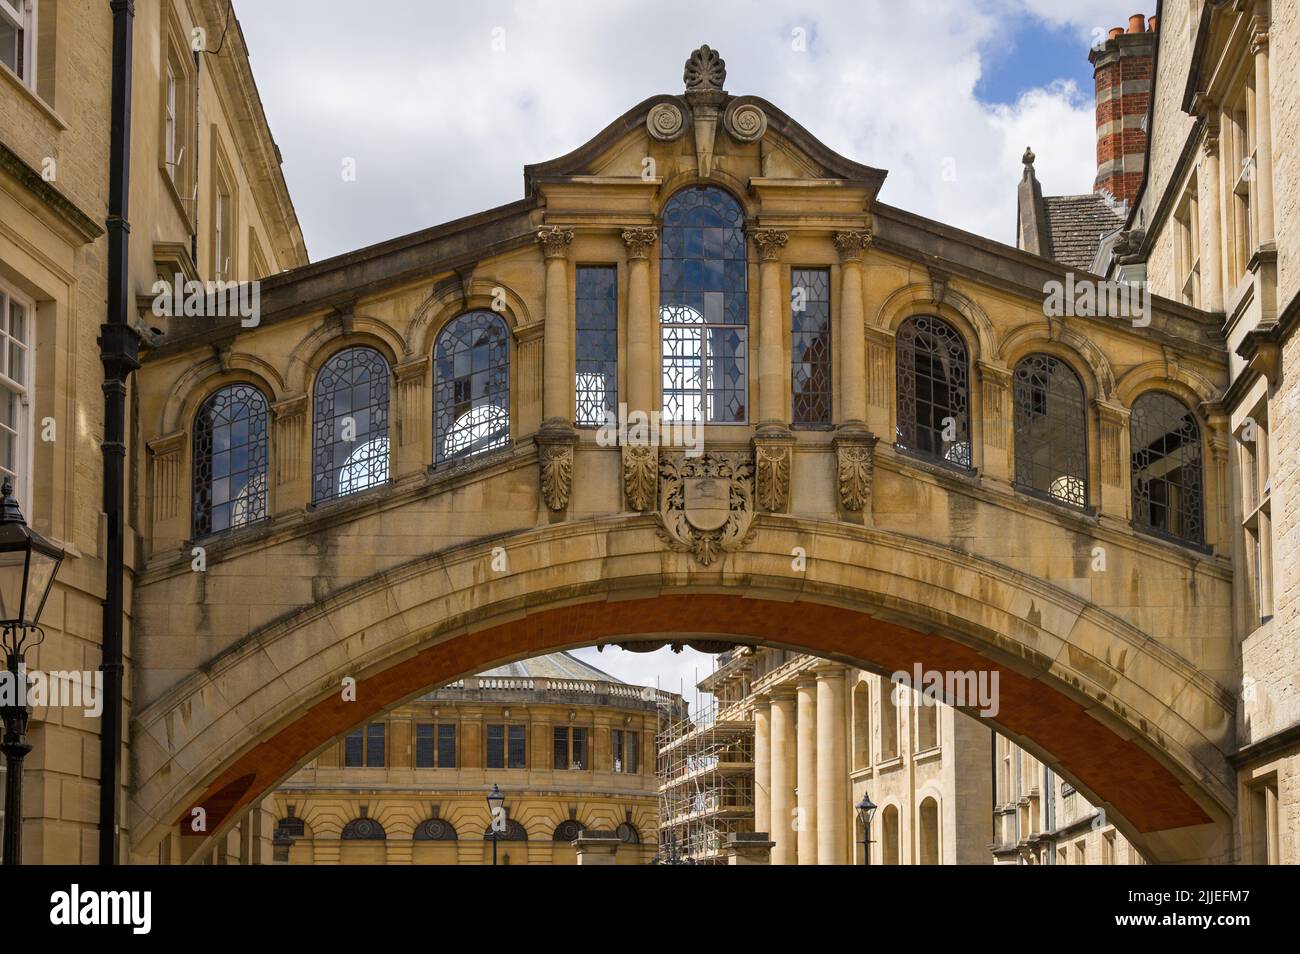 Hertford Bridge, or the Bridge of Sighs, which connects the Hertford College buildings, Oxford, UK Stock Photo